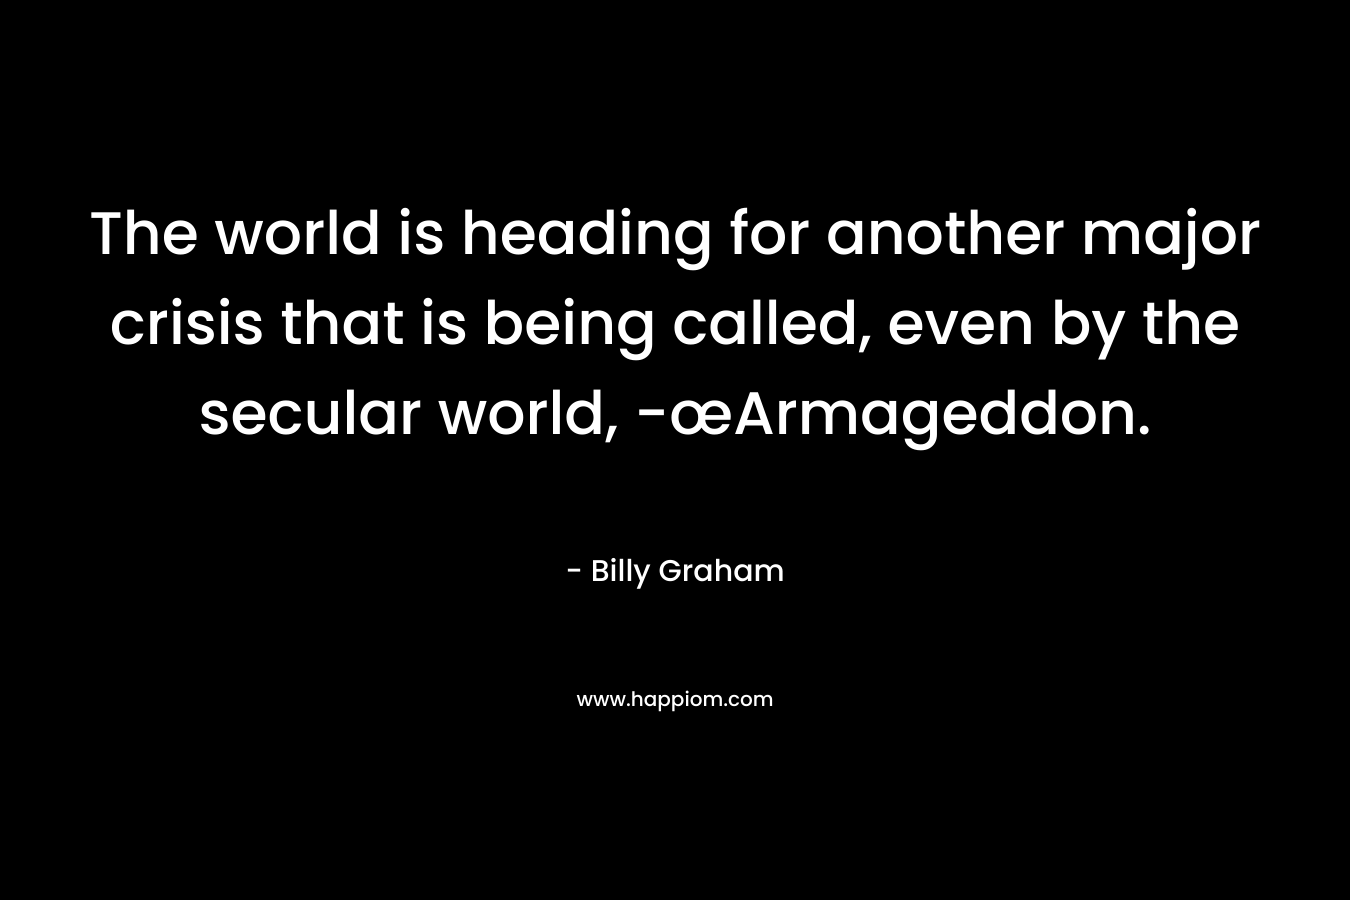 The world is heading for another major crisis that is being called, even by the secular world, -œArmageddon. – Billy Graham